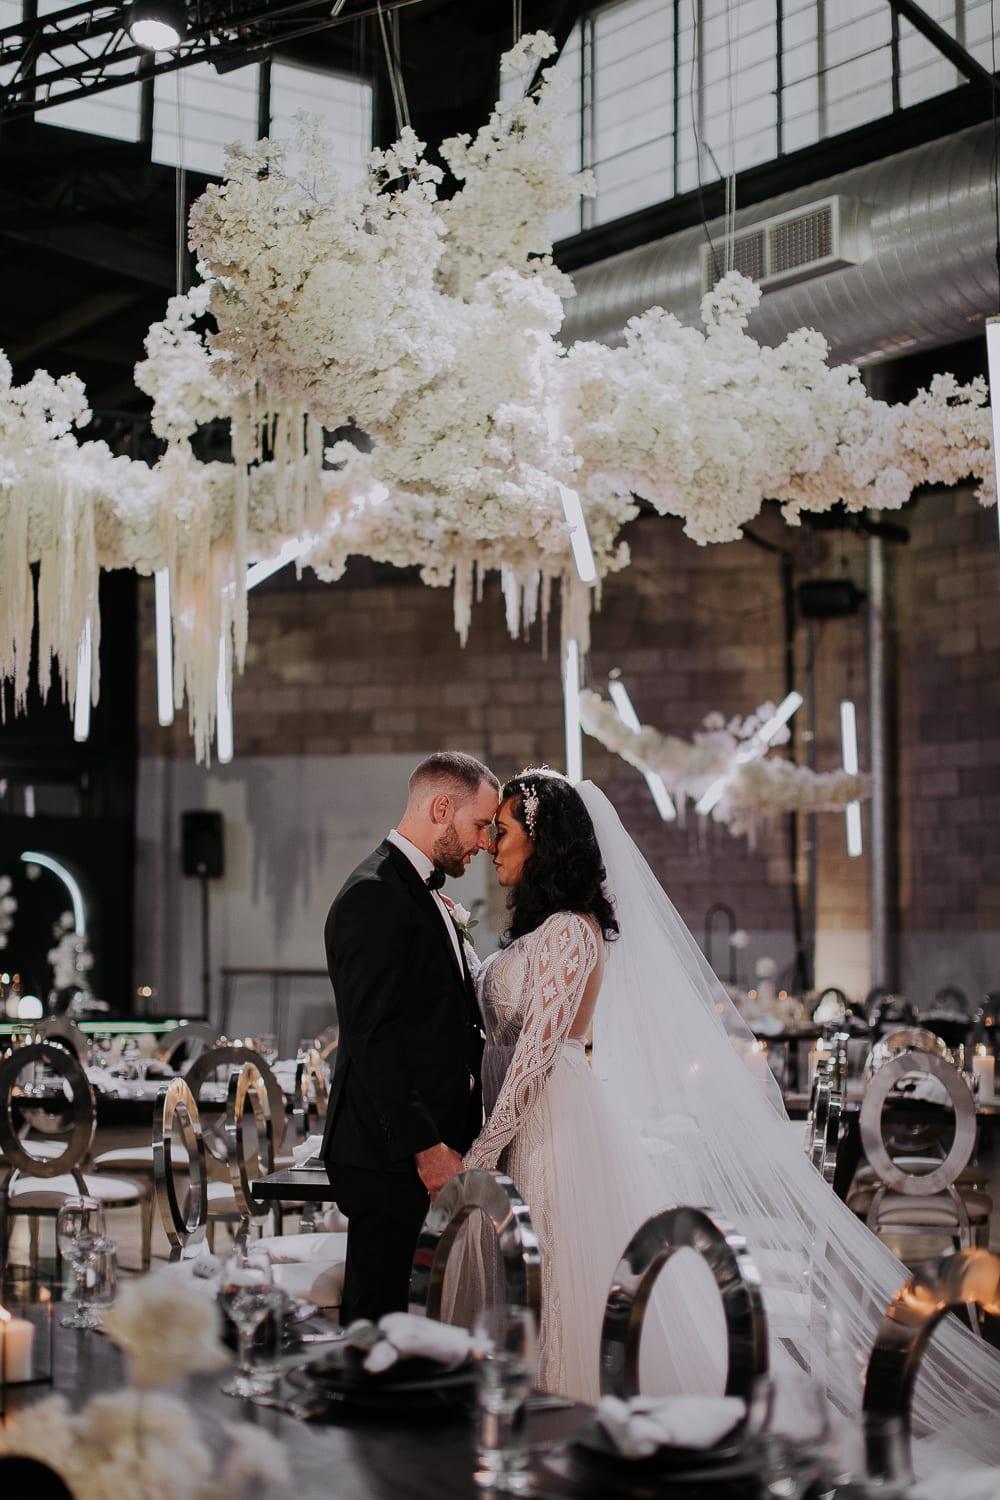 Angeline & Joseph - What Flower Dreams Are Made Of - White Lily Couture